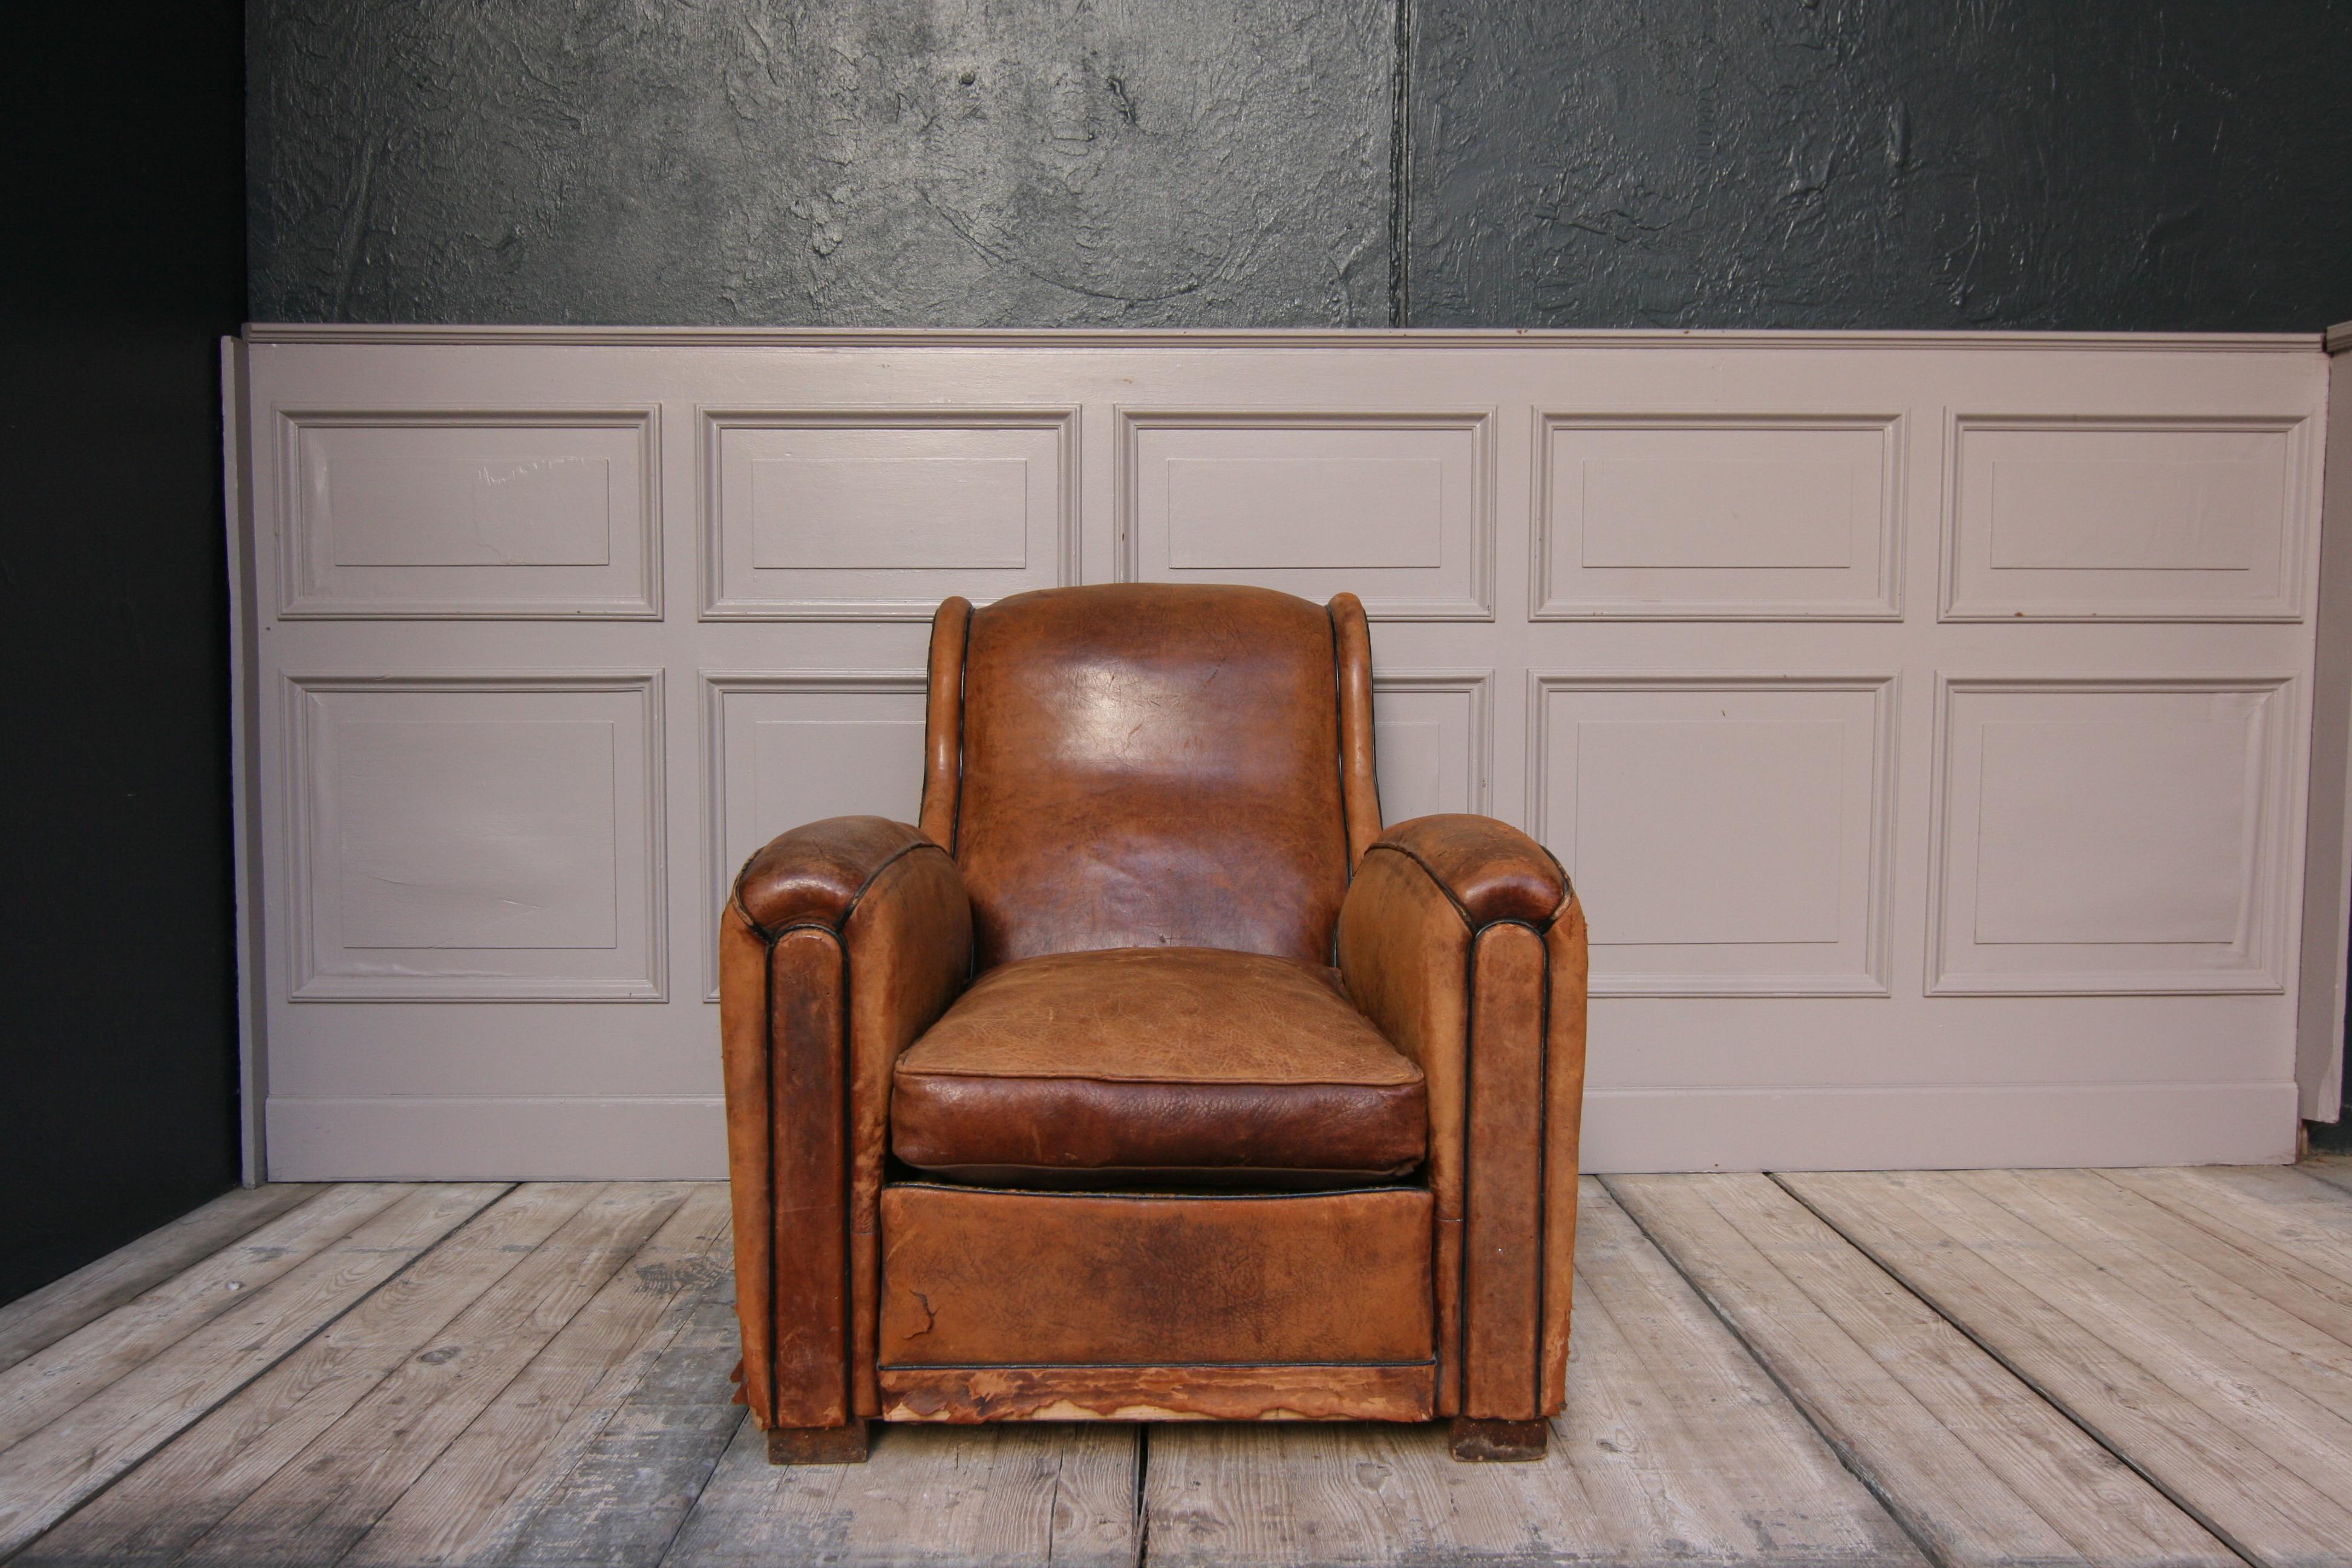 Super comfortable leather armchair from the 1920s.
Nice used original vintage look (please see pictures).

Dimensions:
90 cm high / 35.43 inch high,
80 cm wide / 31.5 inch wide,
100 cm deep / 39.37 inch deep;
Seat height 40 cm / 15.75 inch.